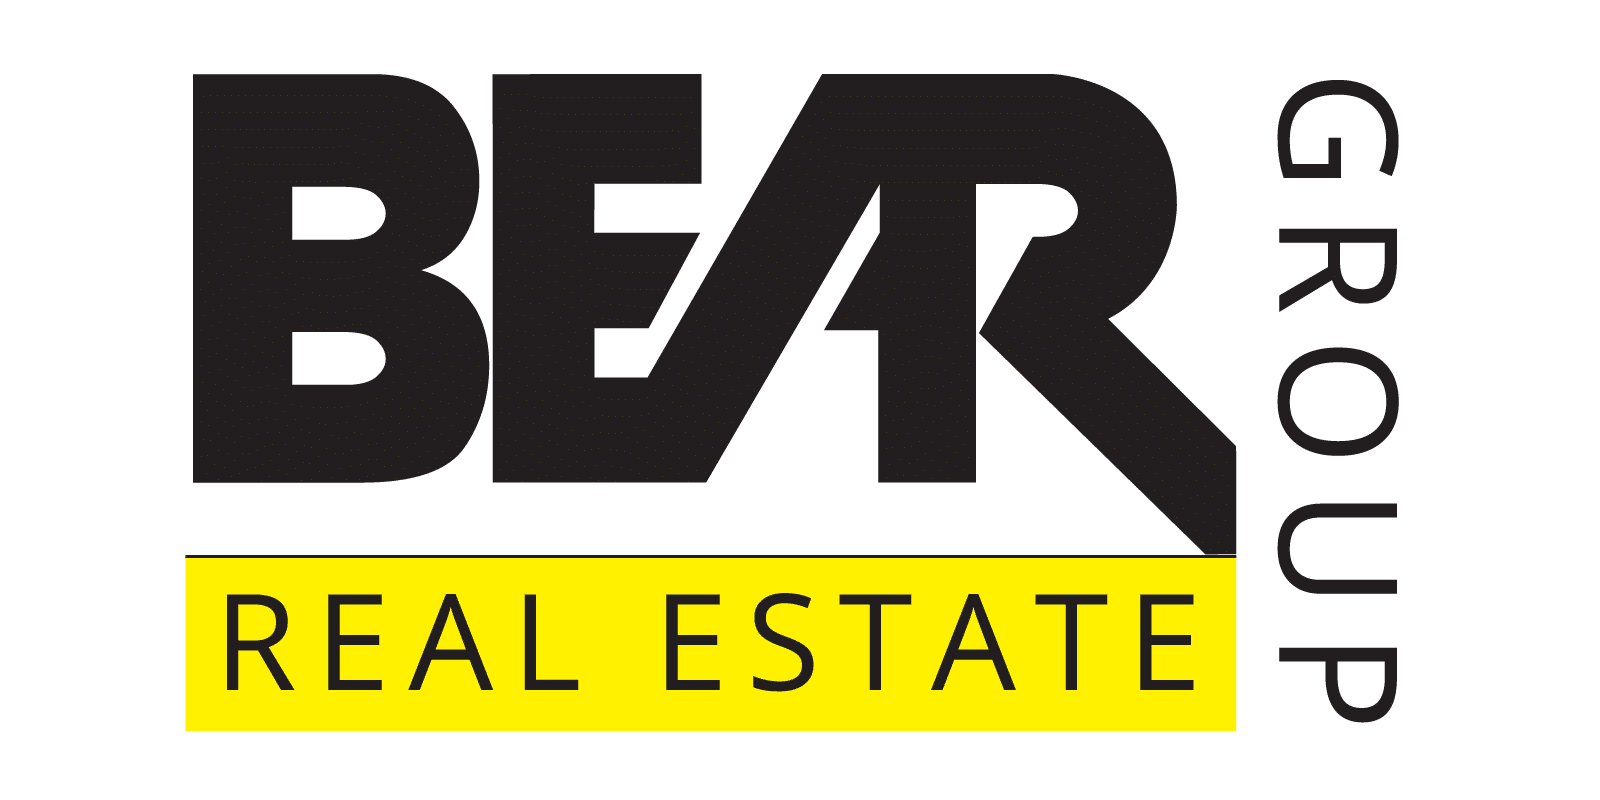 bear real estate group, page 1 club, the gratzi